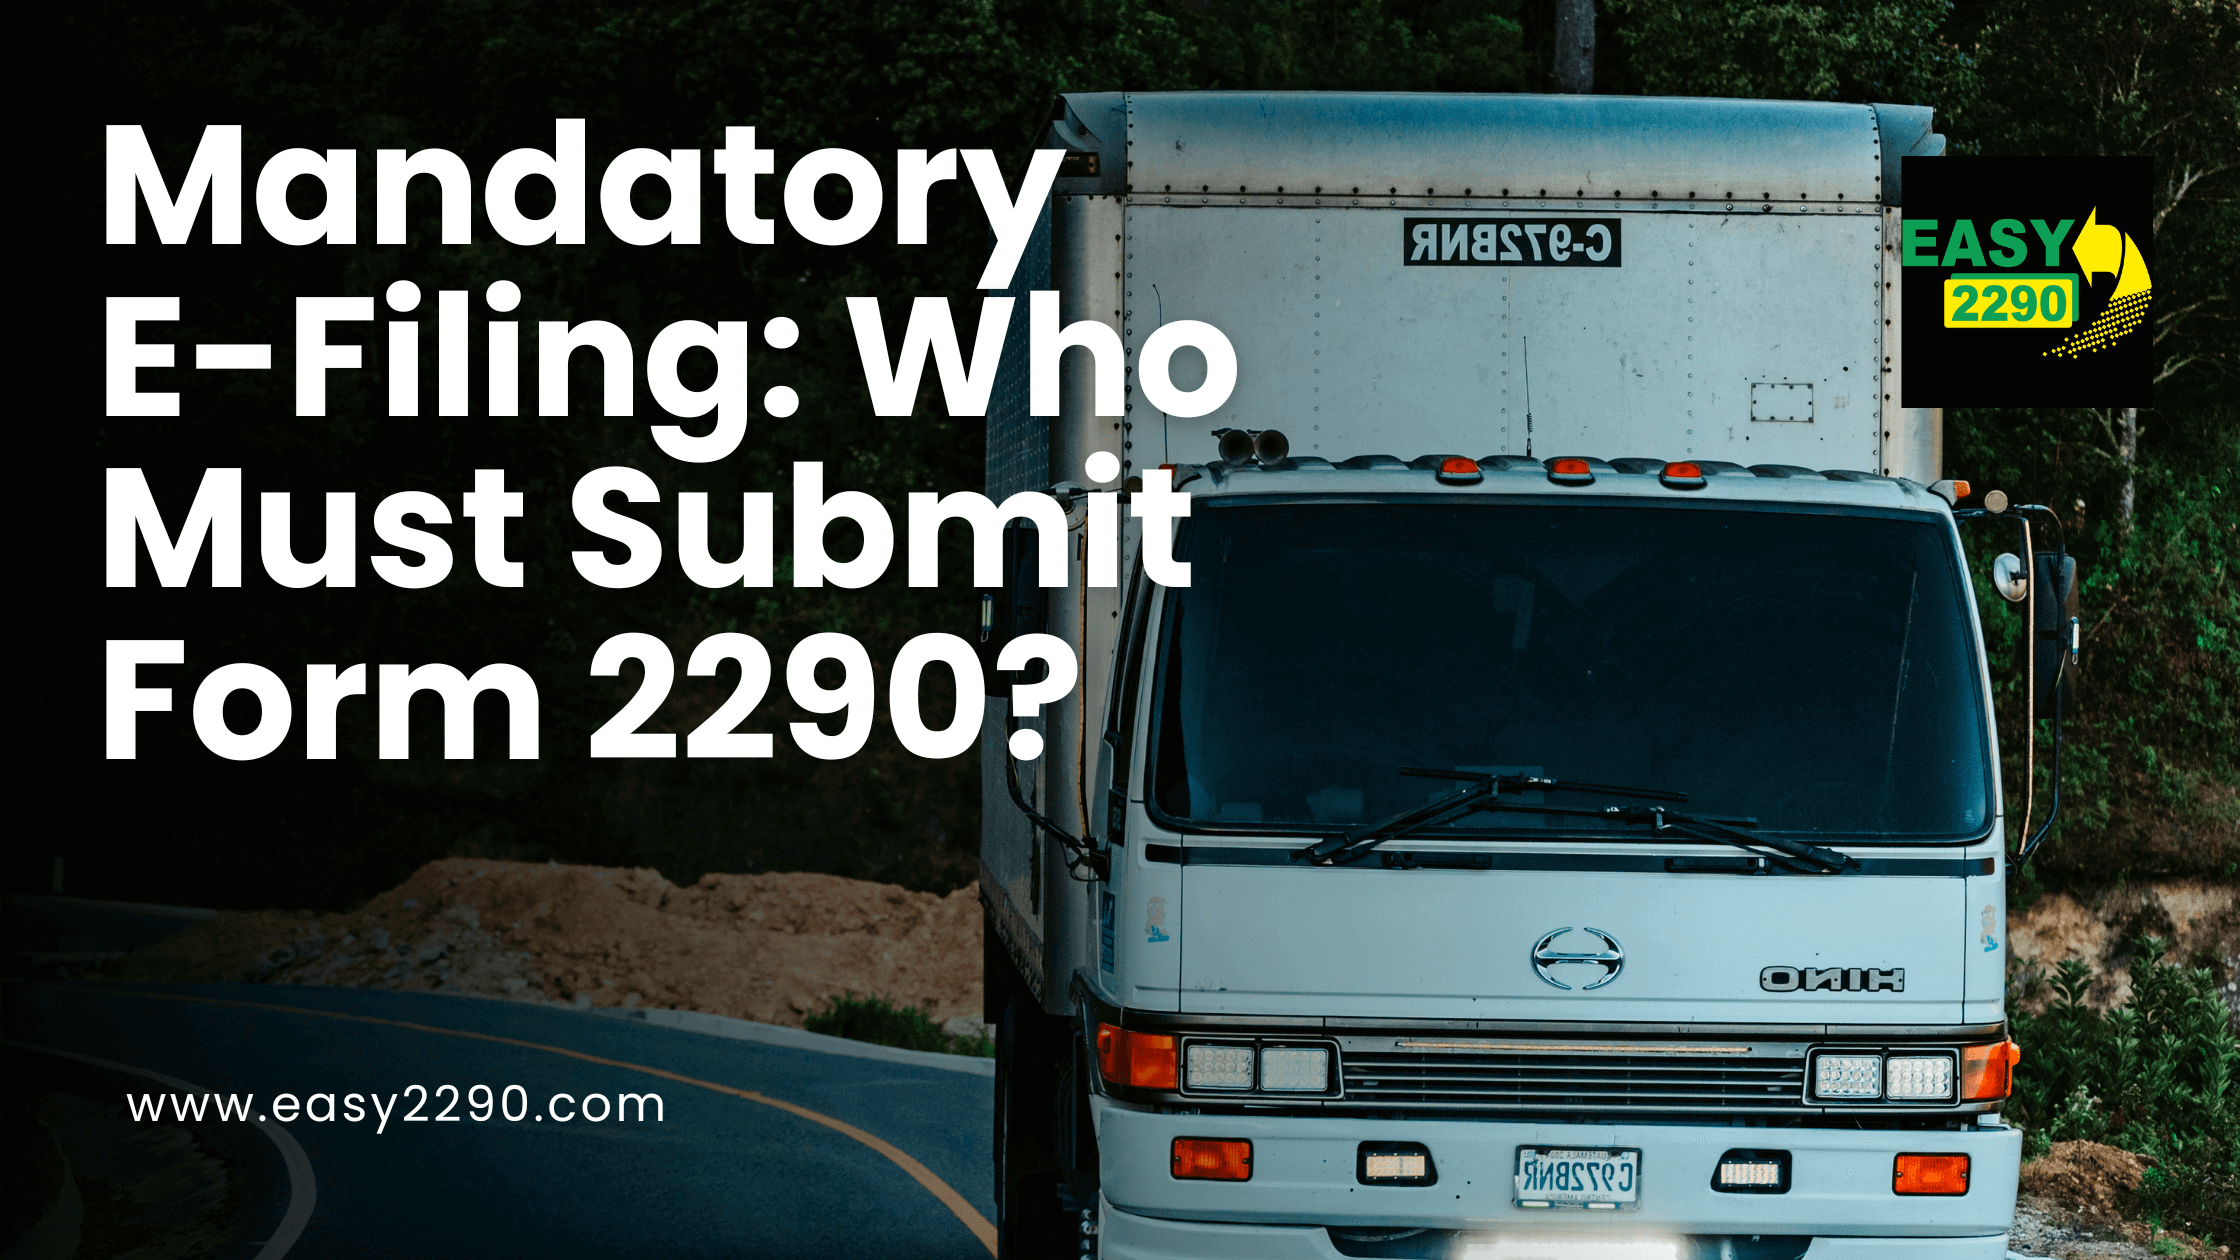 Mandatory E-Filing: Who Must Submit Form 2290?